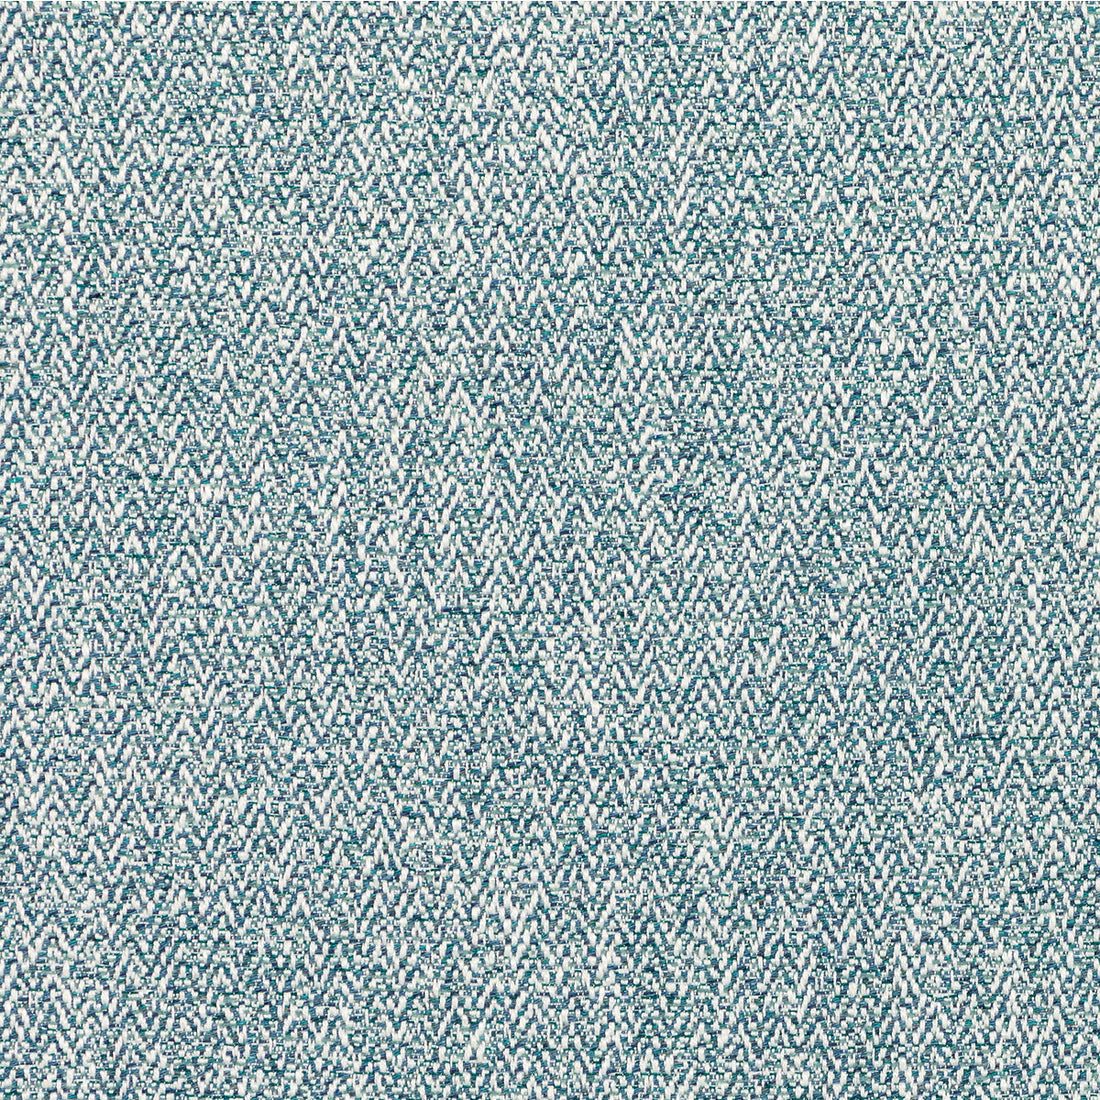 Saumur fabric in capri color - pattern 36107.51.0 - by Kravet Couture in the Luxury Textures II collection